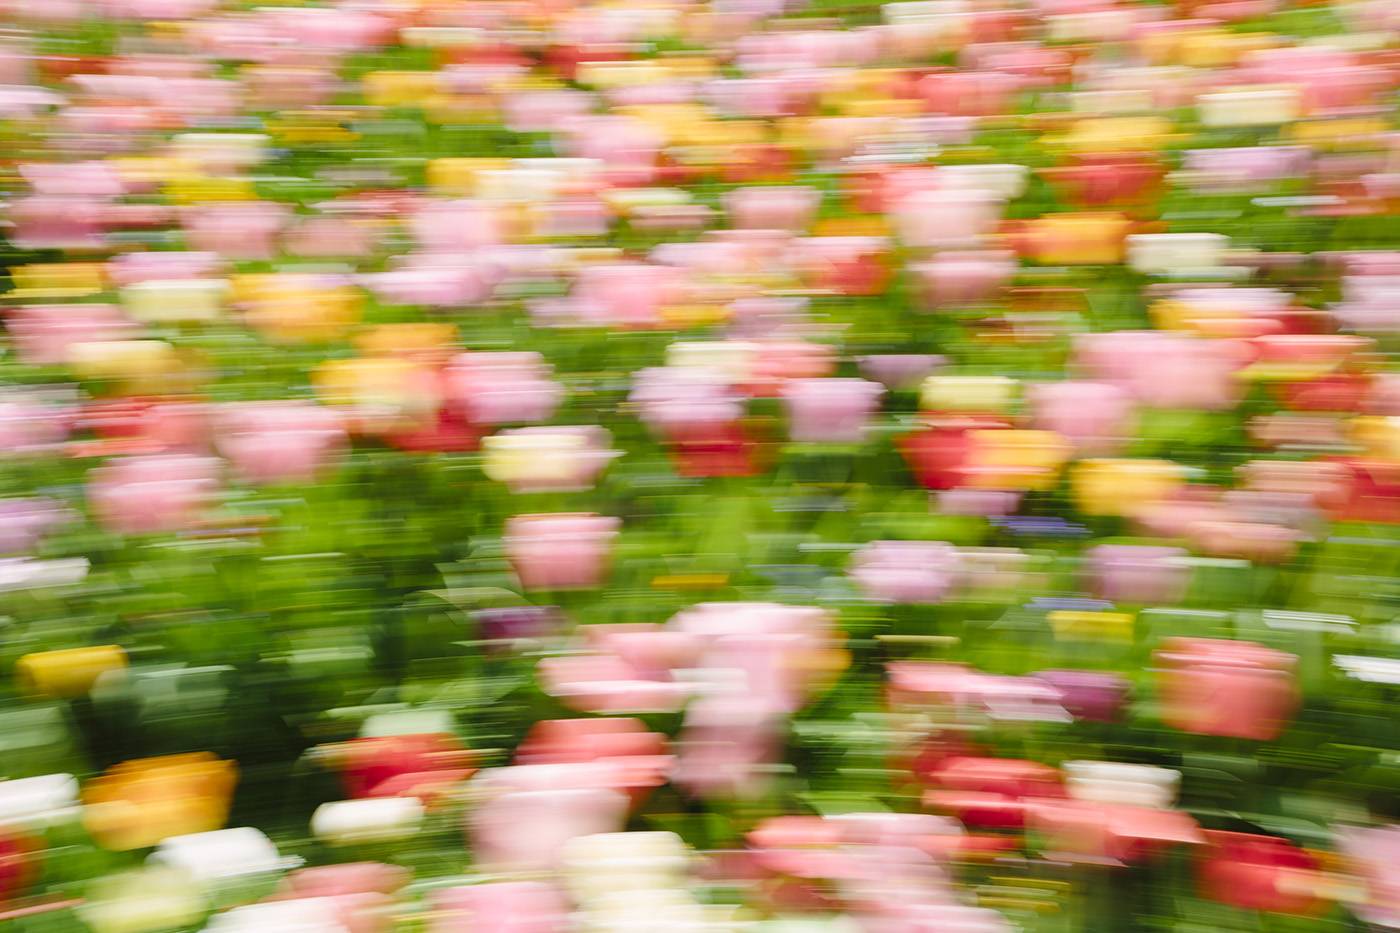 Photograph of a tulip field with motion blur that looks like an abstract painting.